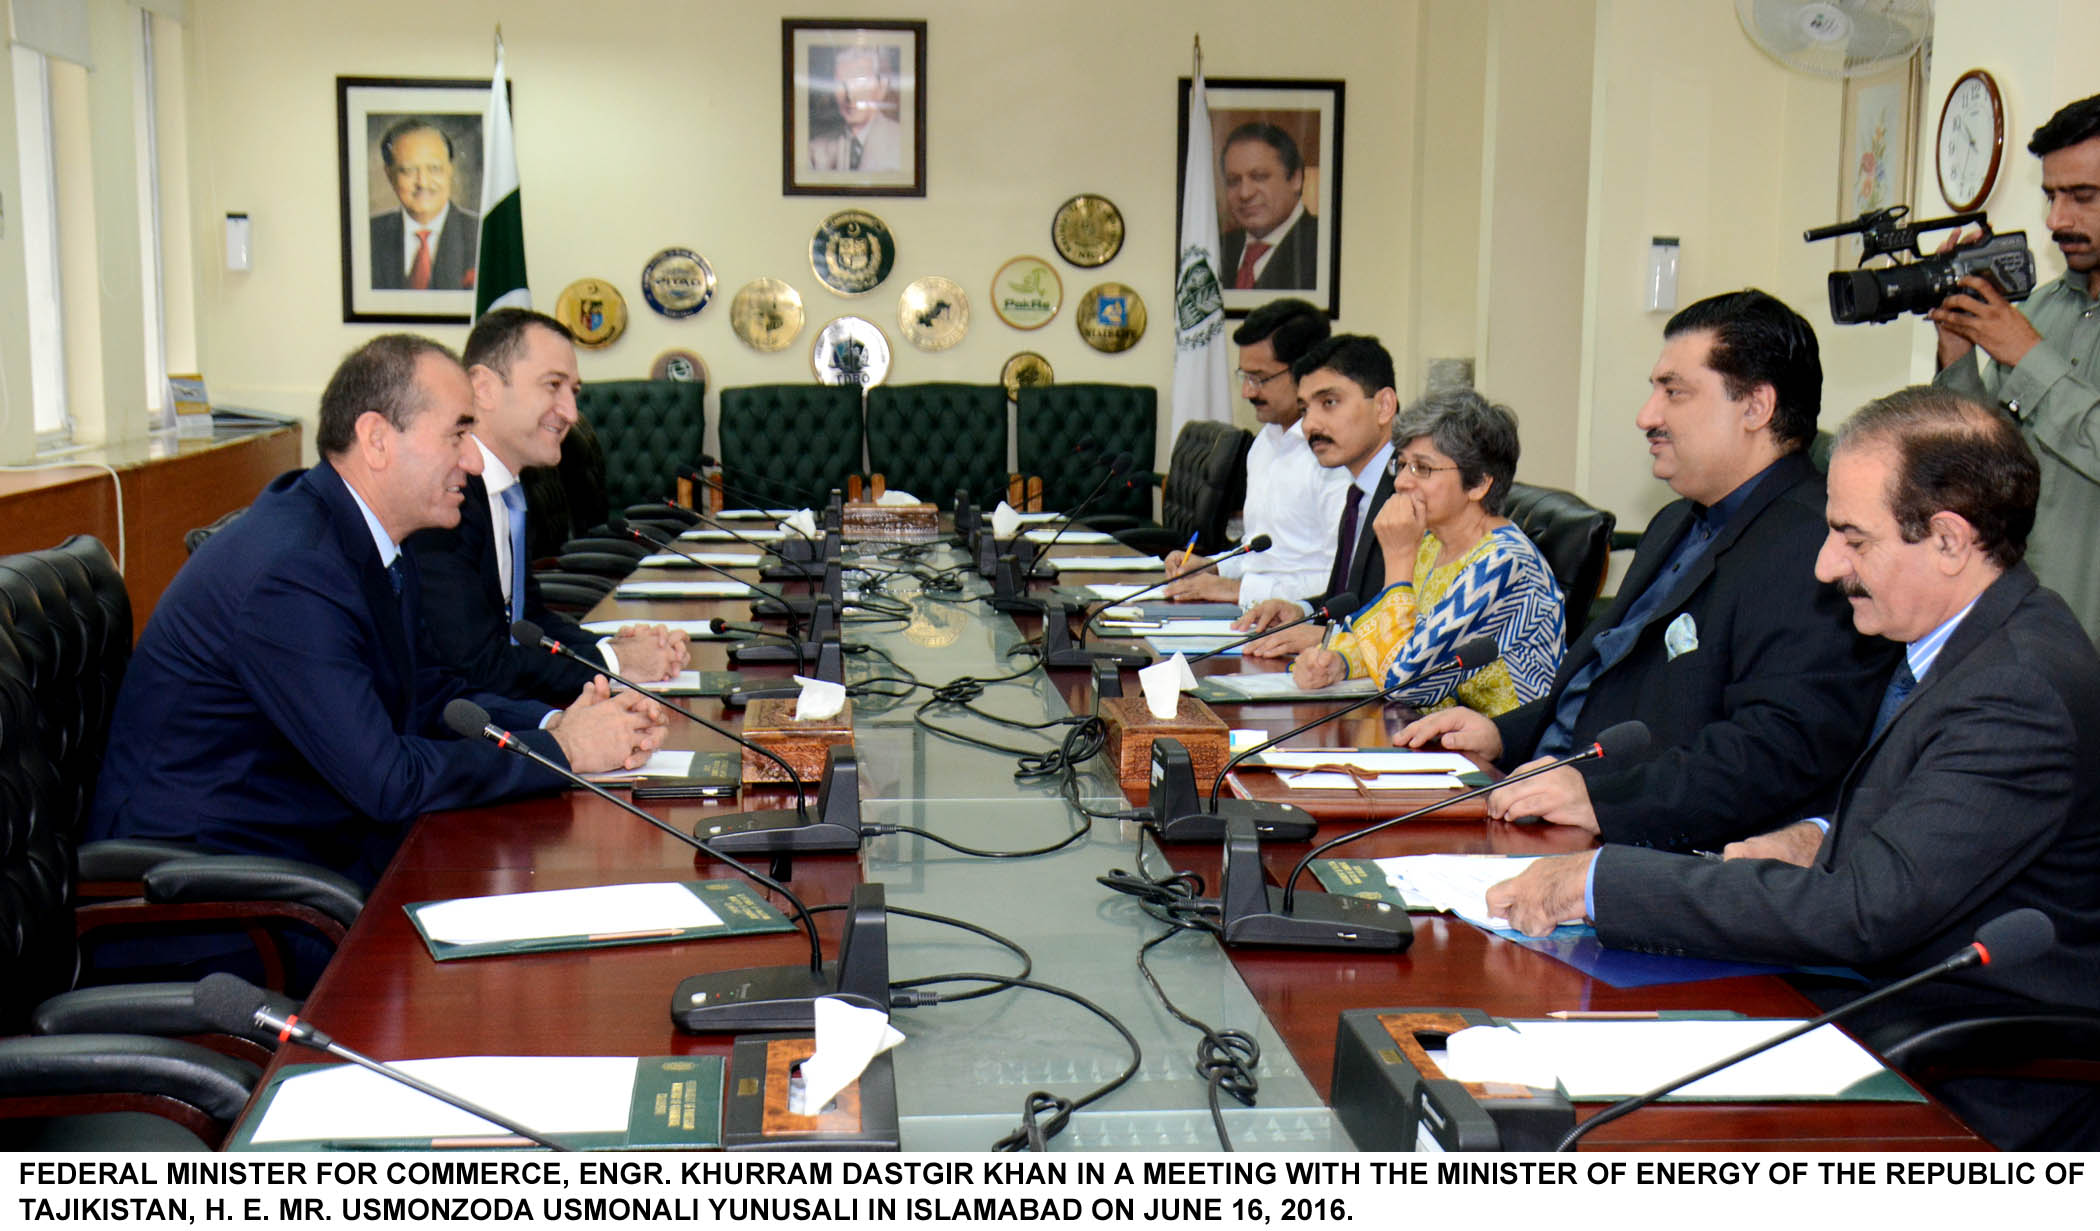 FEDERAL MINISTER FOR COMMERCE, ENGR. KHURRAM DASTGIR KHAN IN A MEETING WITH THE MINISTER OF ENERGY OF THE REPUBLIC OF TAJIKISTAN, H. E. MR. USMONZODA USMONALI YUNUSALI IN ISLAMABAD ON JUNE 16, 2016.